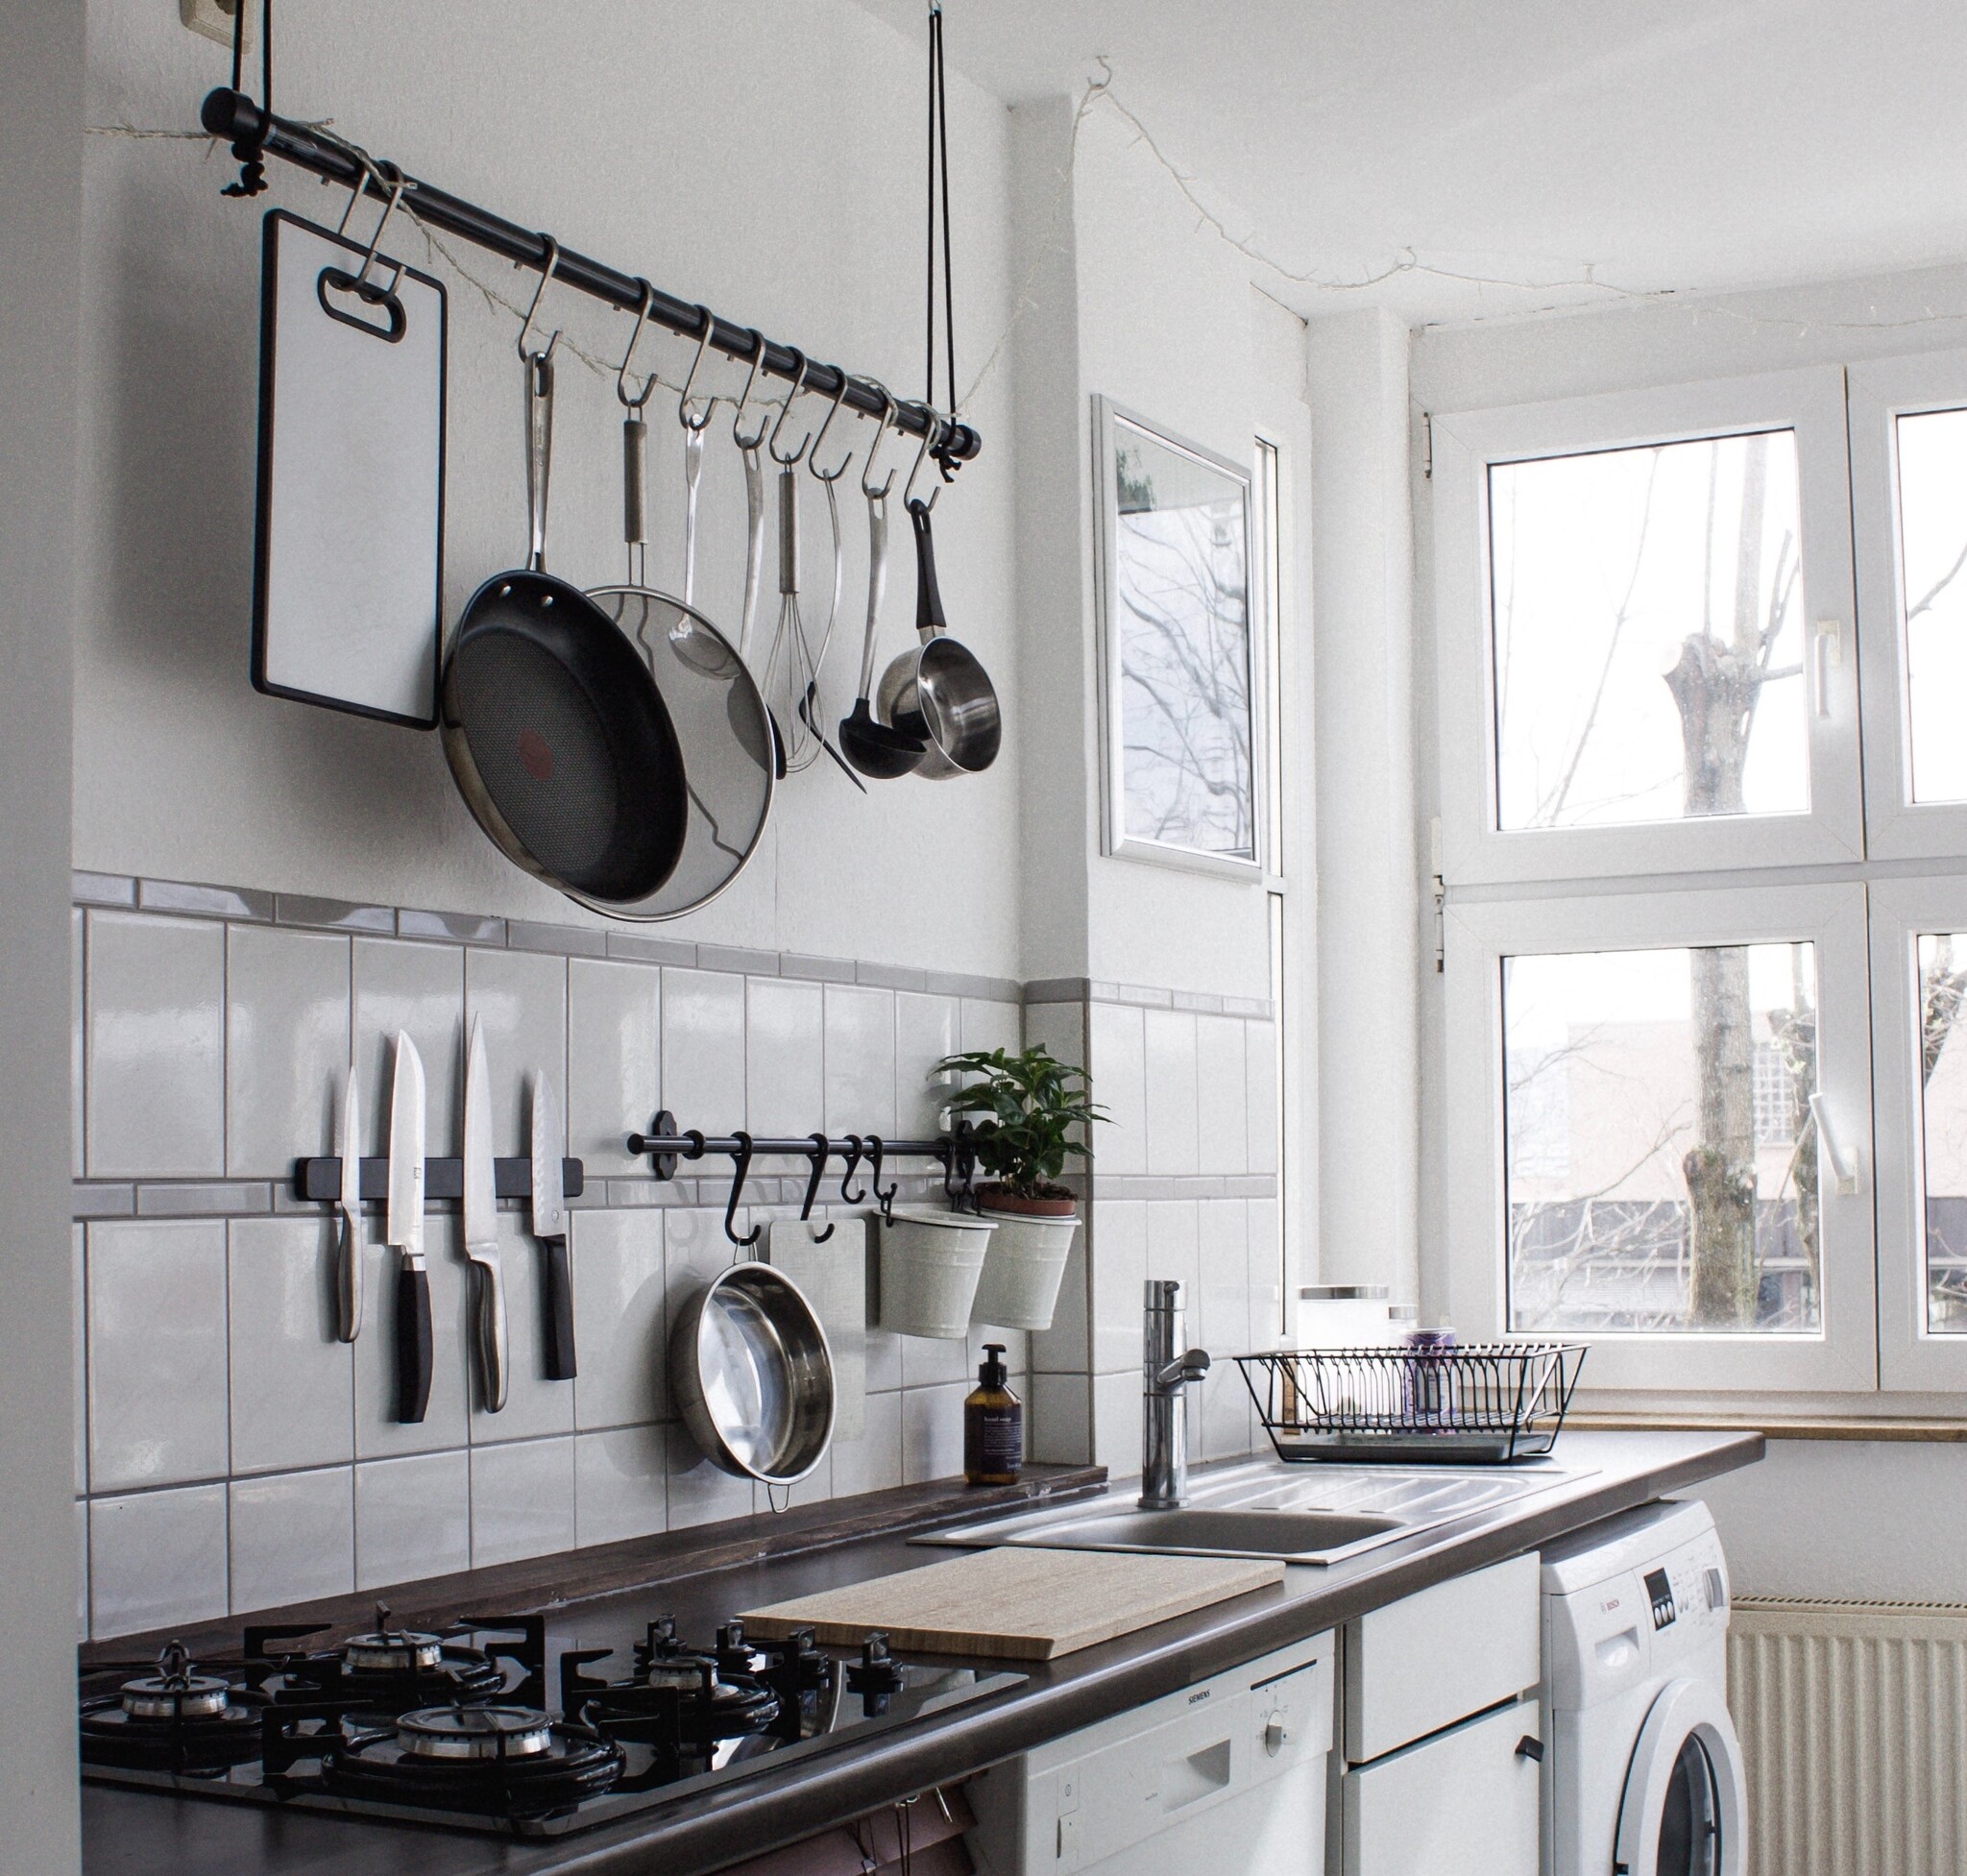 A kitchen with white appliances; black countertops; and pots, pans, and knives hung on the wall. 